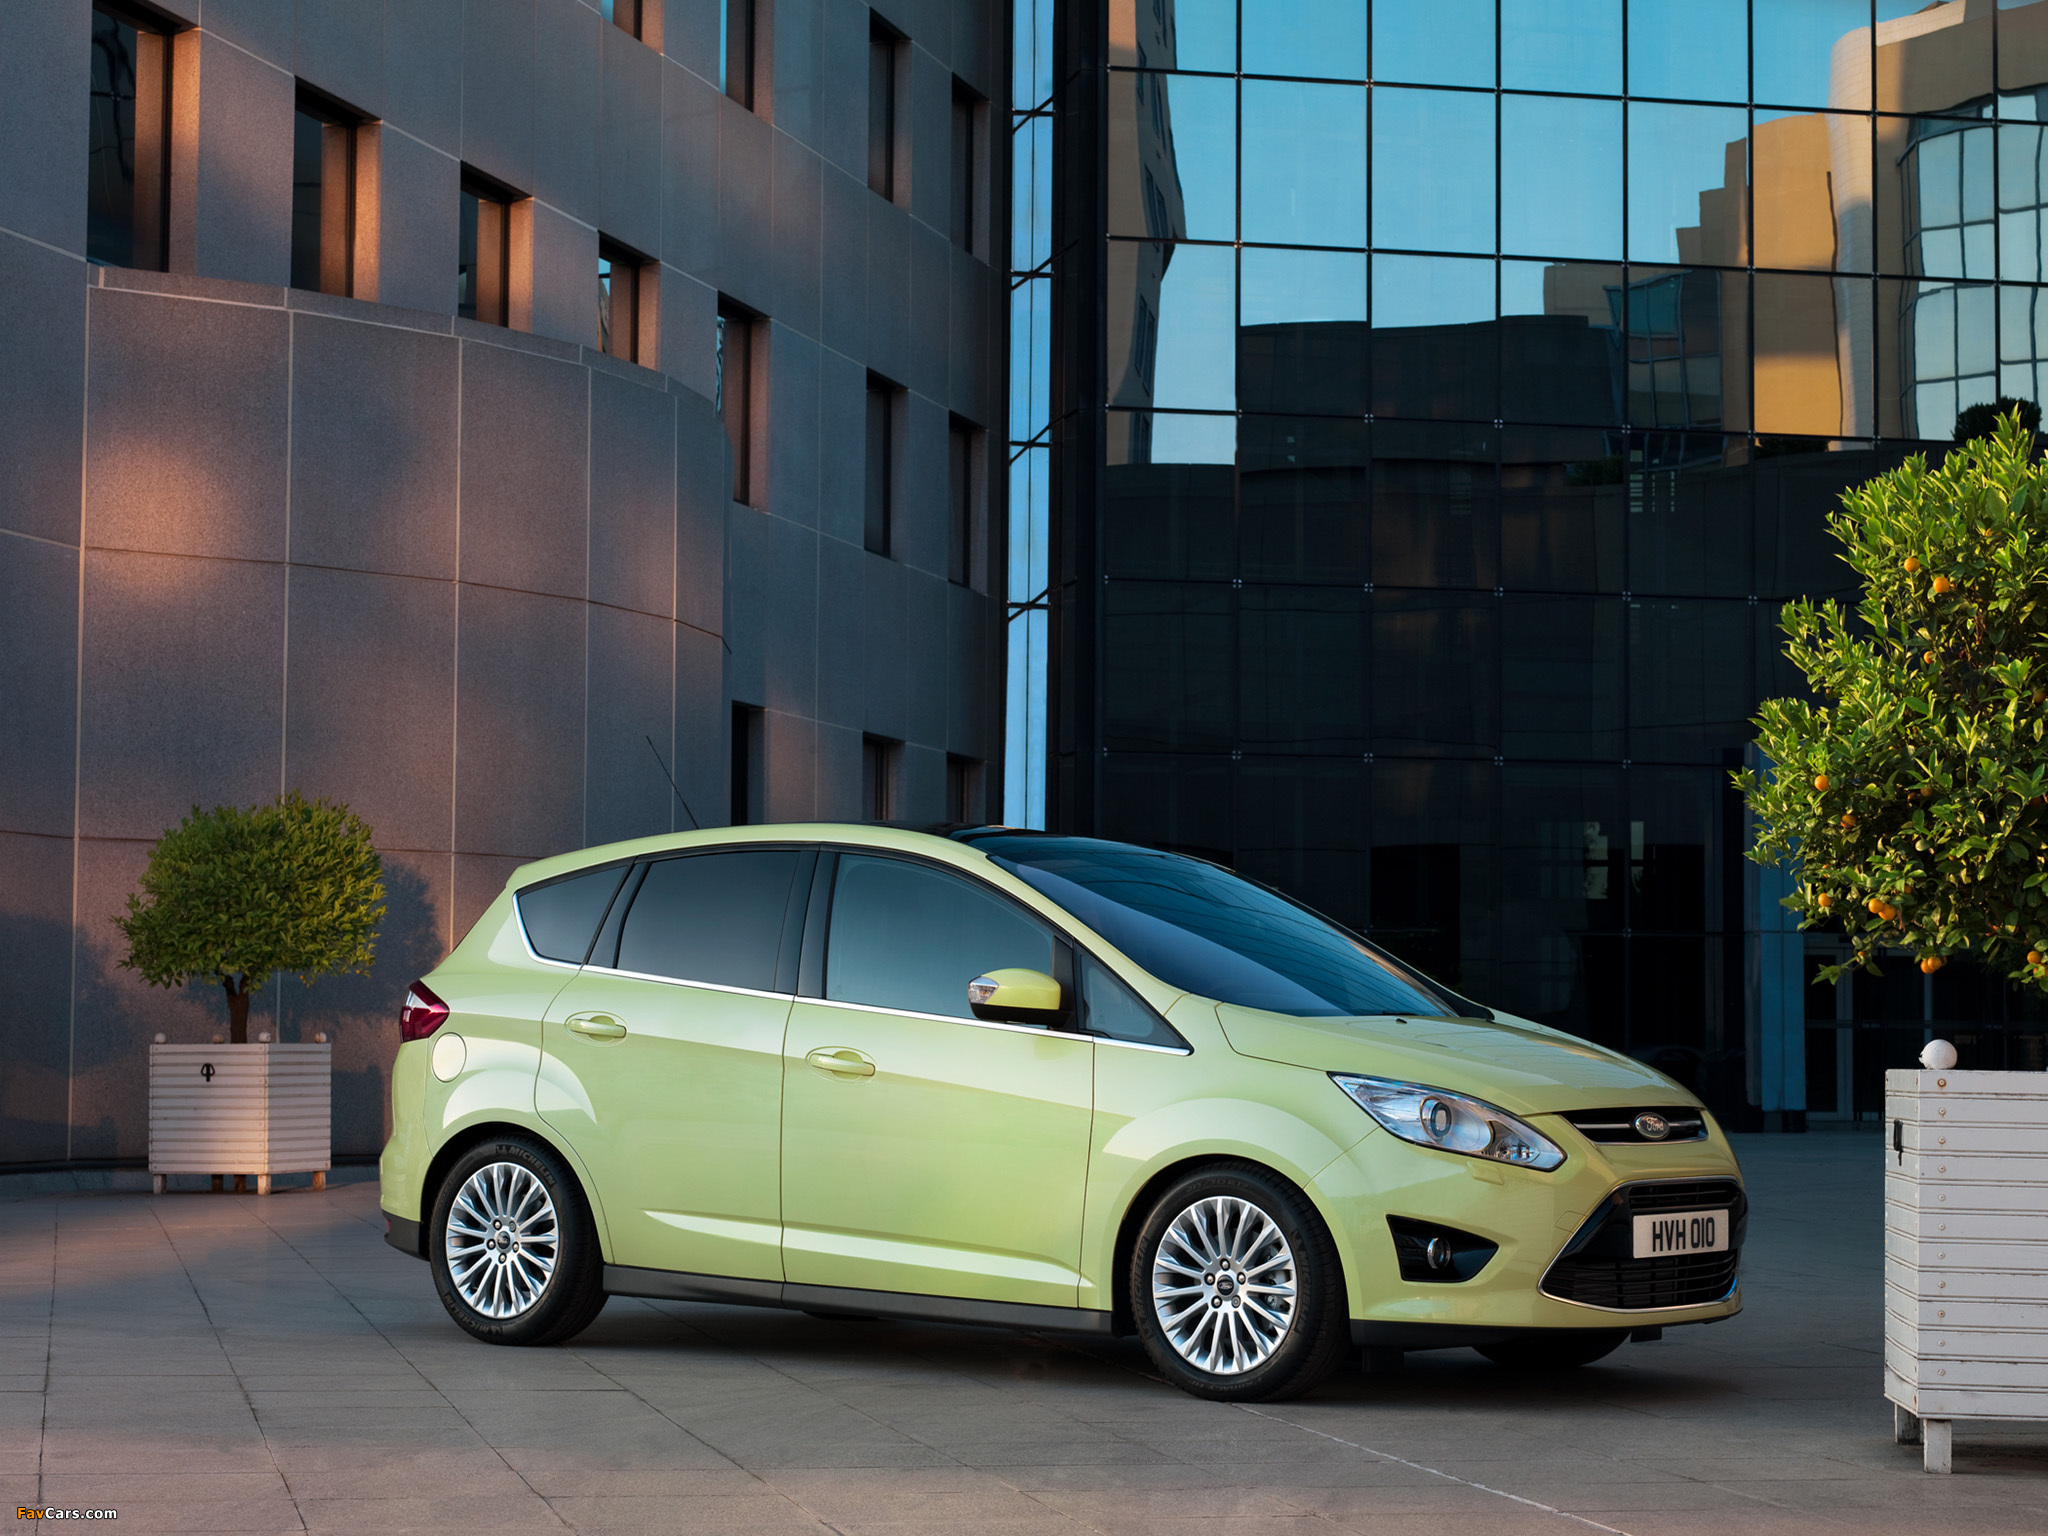 Ford C-MAX 2010 pictures (2048 x 1536)